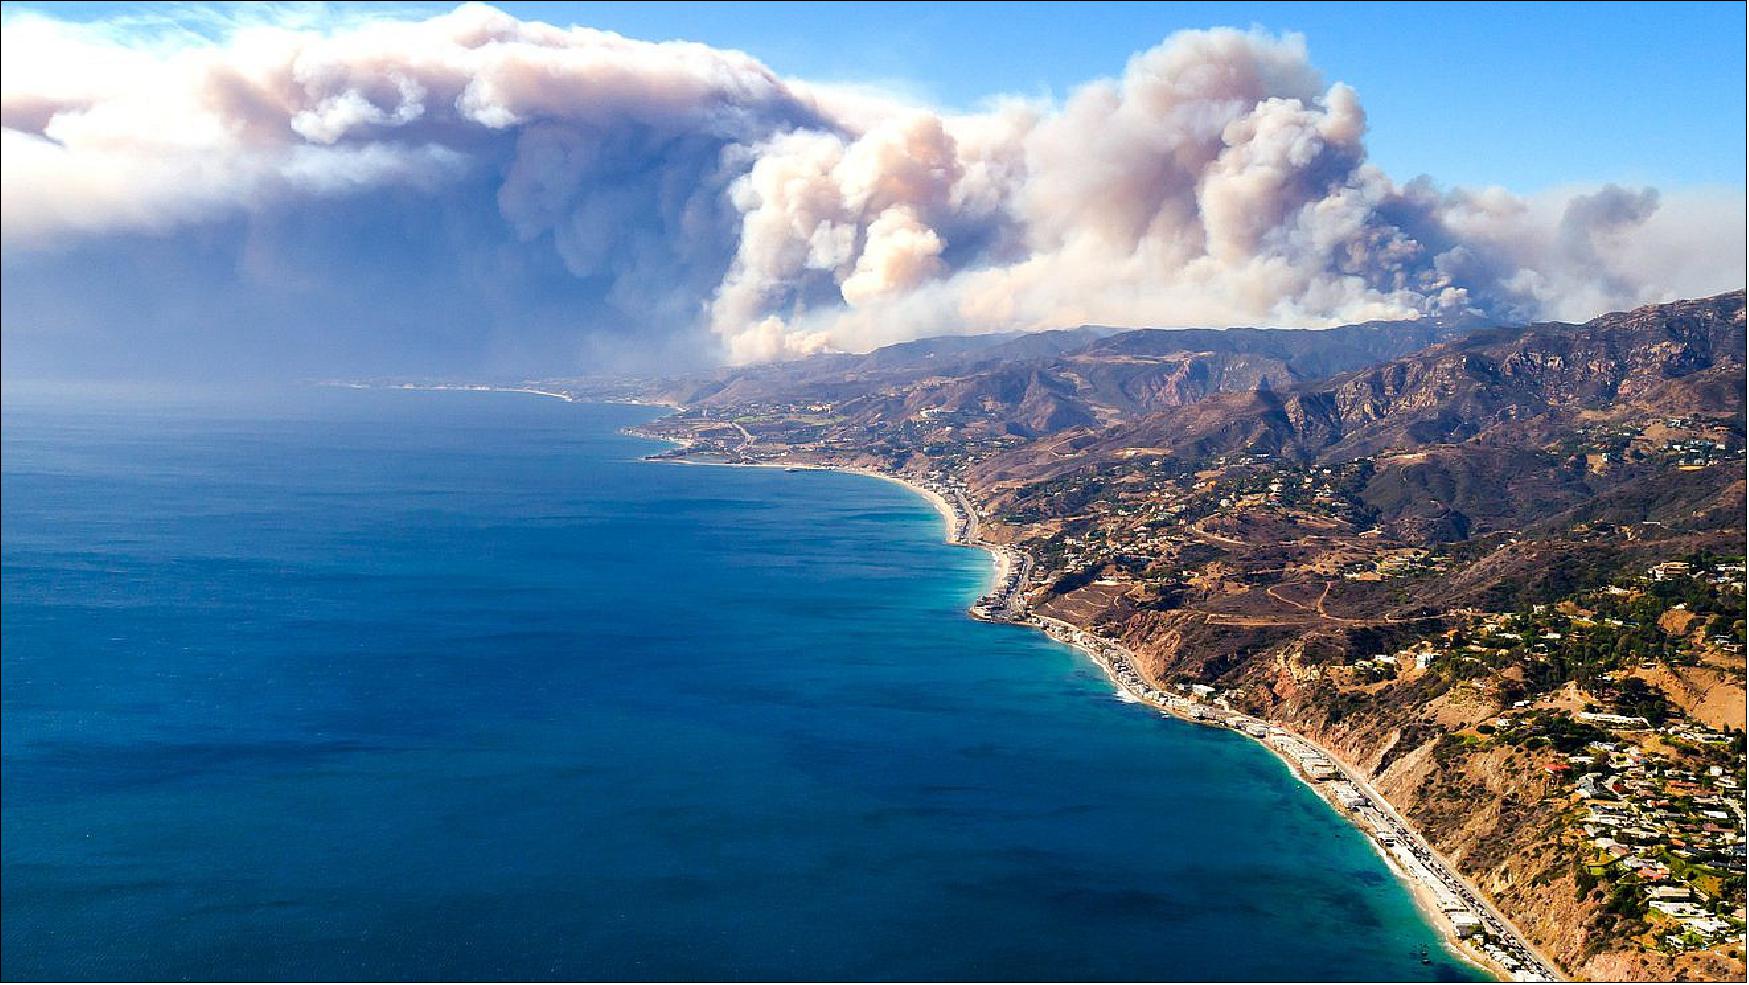 Figure 1: The 2018 Woolsey Fire in California burned nearly 100,000 cares in Los Angeles and Ventura counties. This image was taken on 9 November 2018 (image credit: Forest Service, USDA, courtesy of Peter Buschmann)